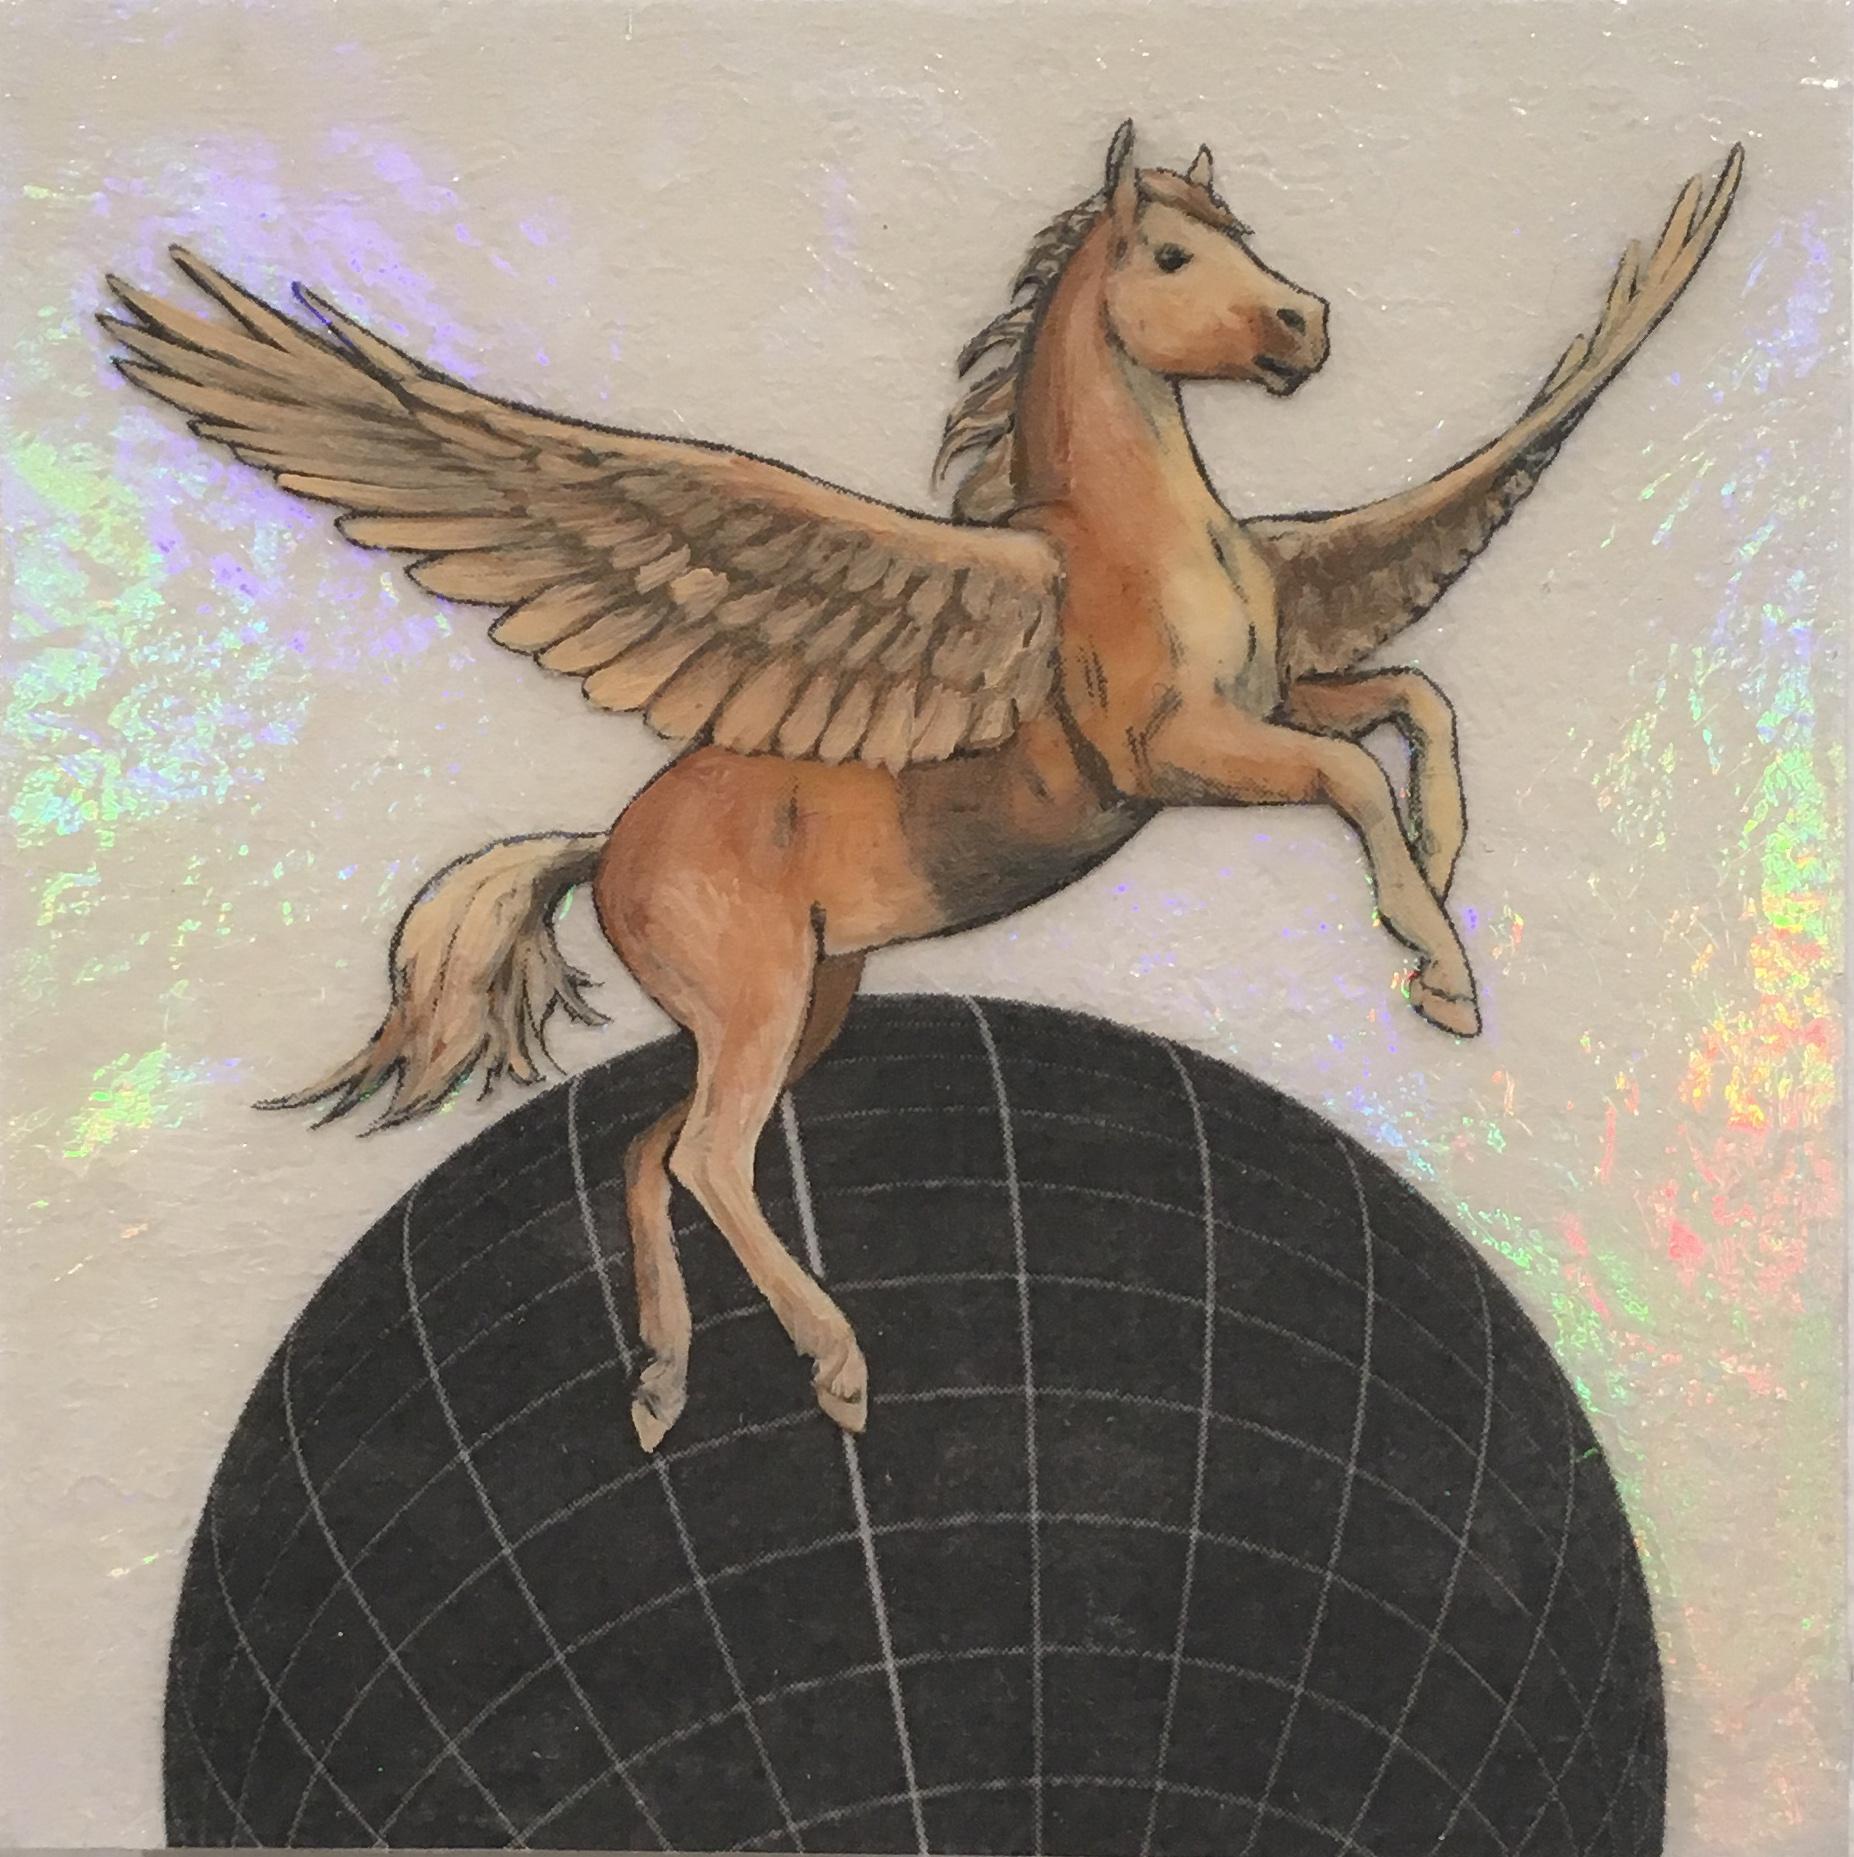 Earthen Pegasus, oil, holographic foil, mythical creature, figurative, animal  - Contemporary Mixed Media Art by Alexis Kandra